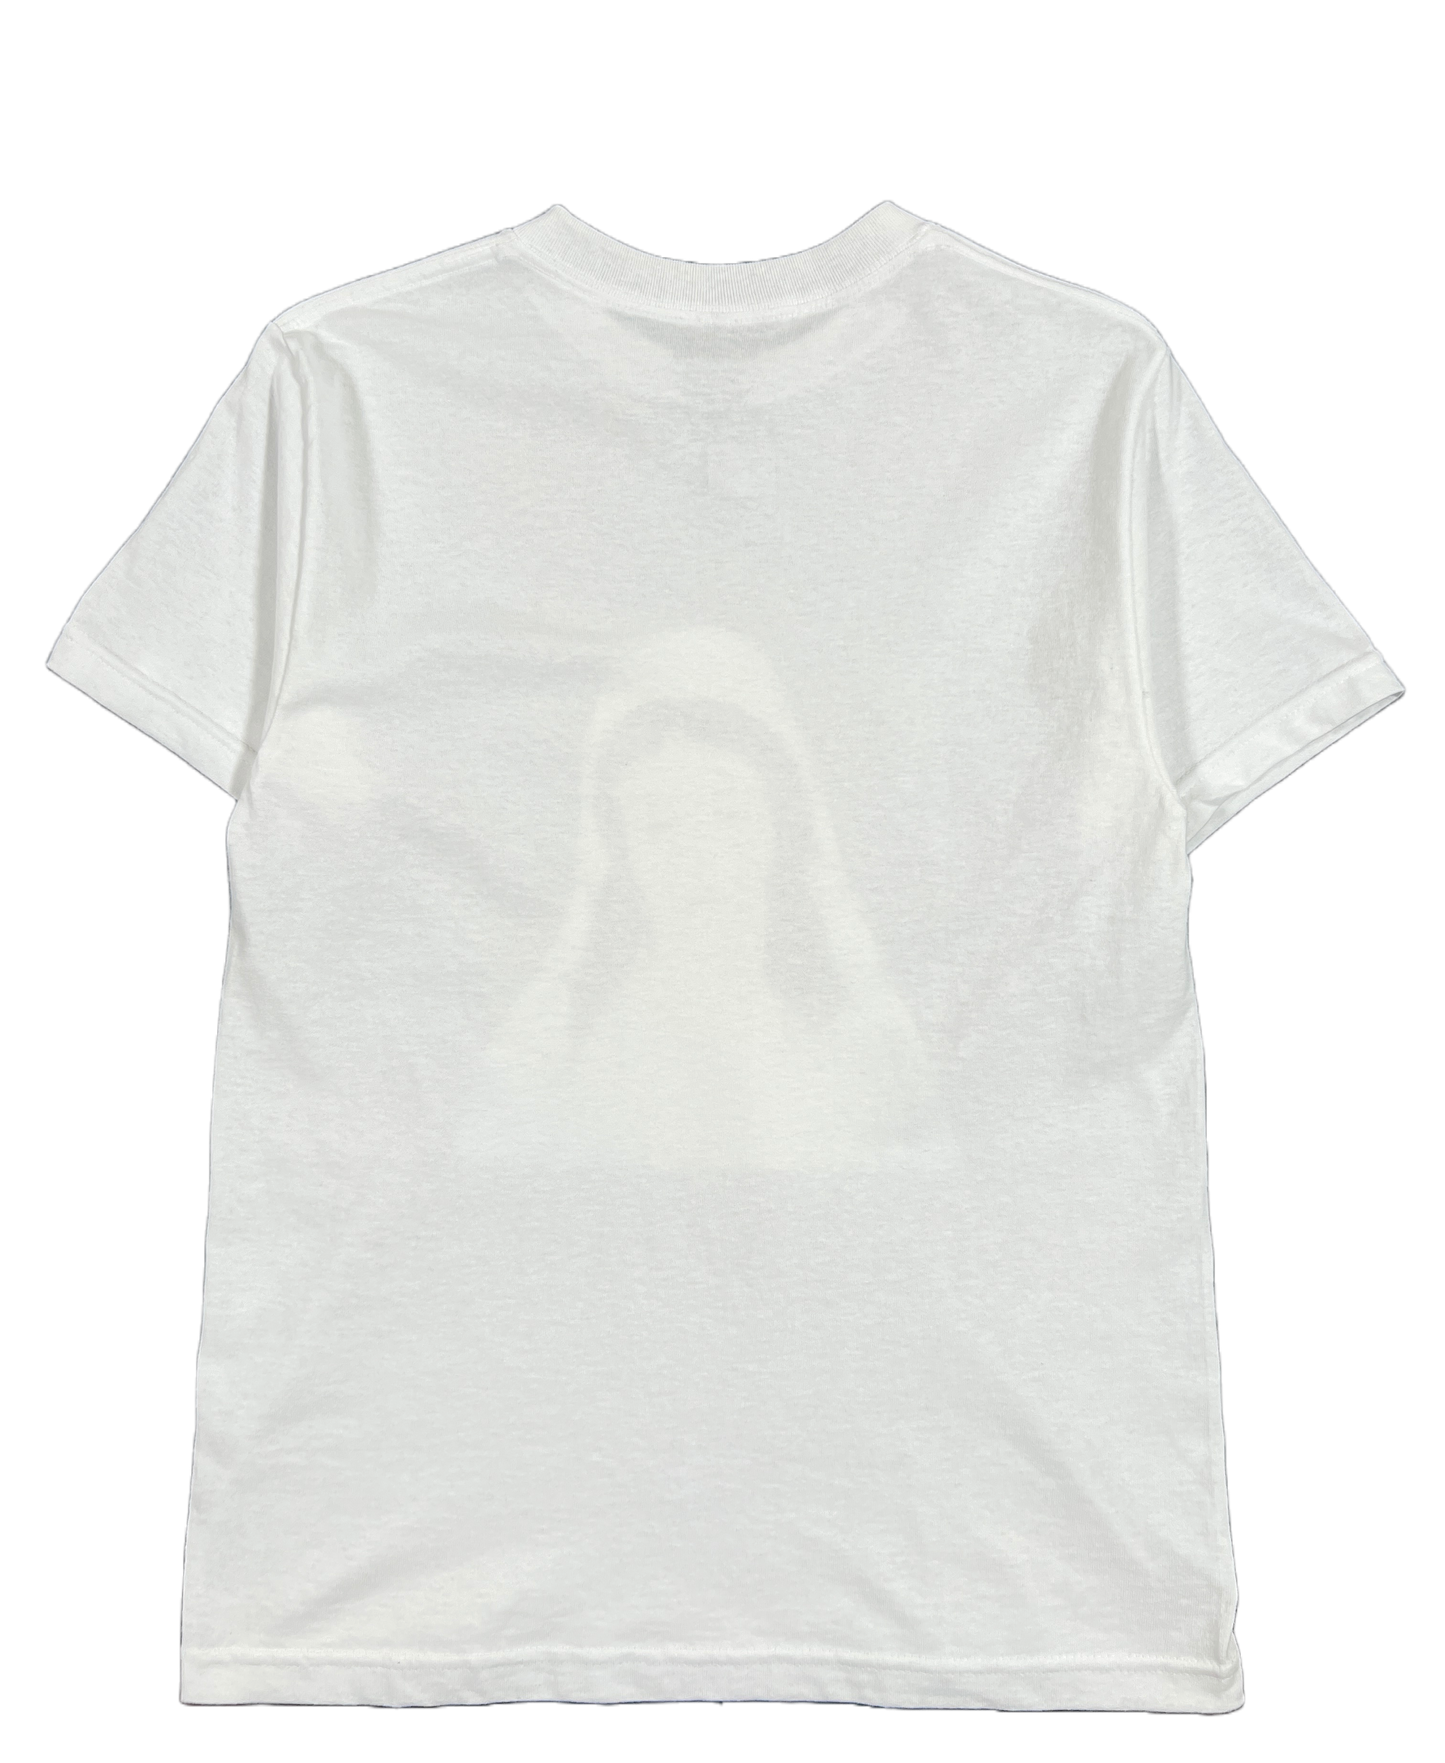 A white cotton PLEASURES MOTHER t-shirt with a graphic image of a woman.